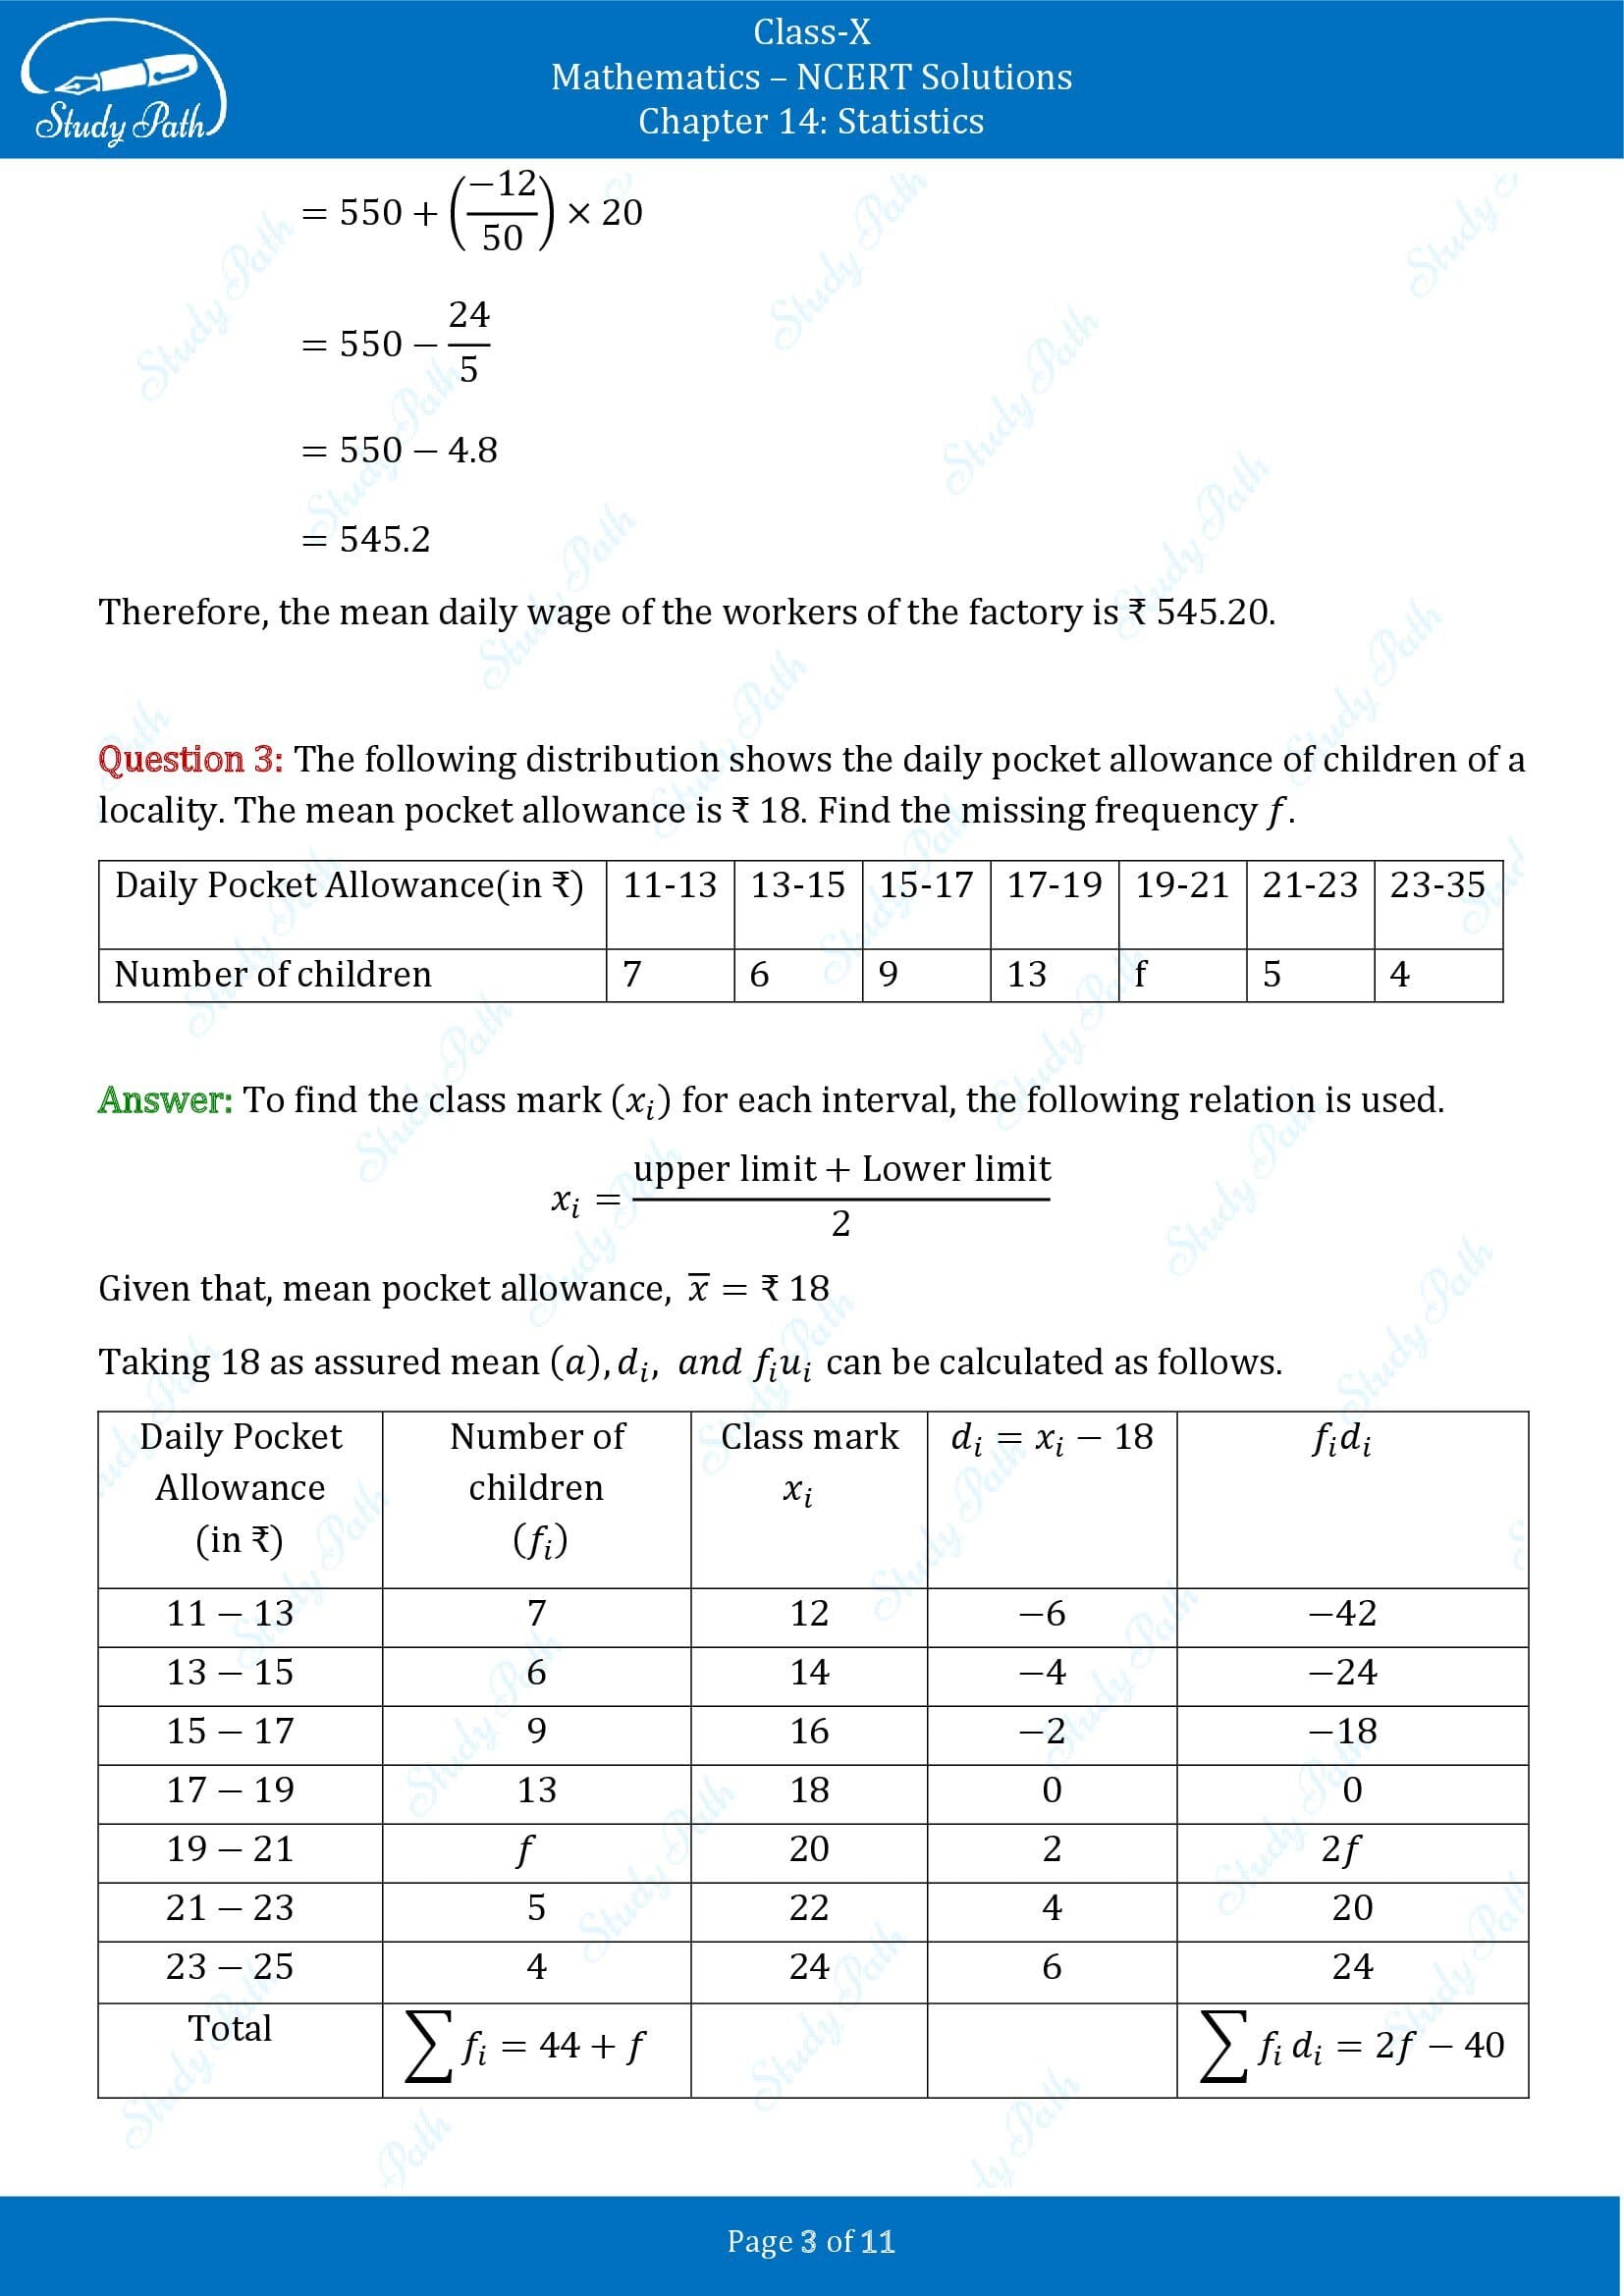 NCERT Solutions for Class 10 Maths Chapter 14 Statistics Exercise 14.1 00003